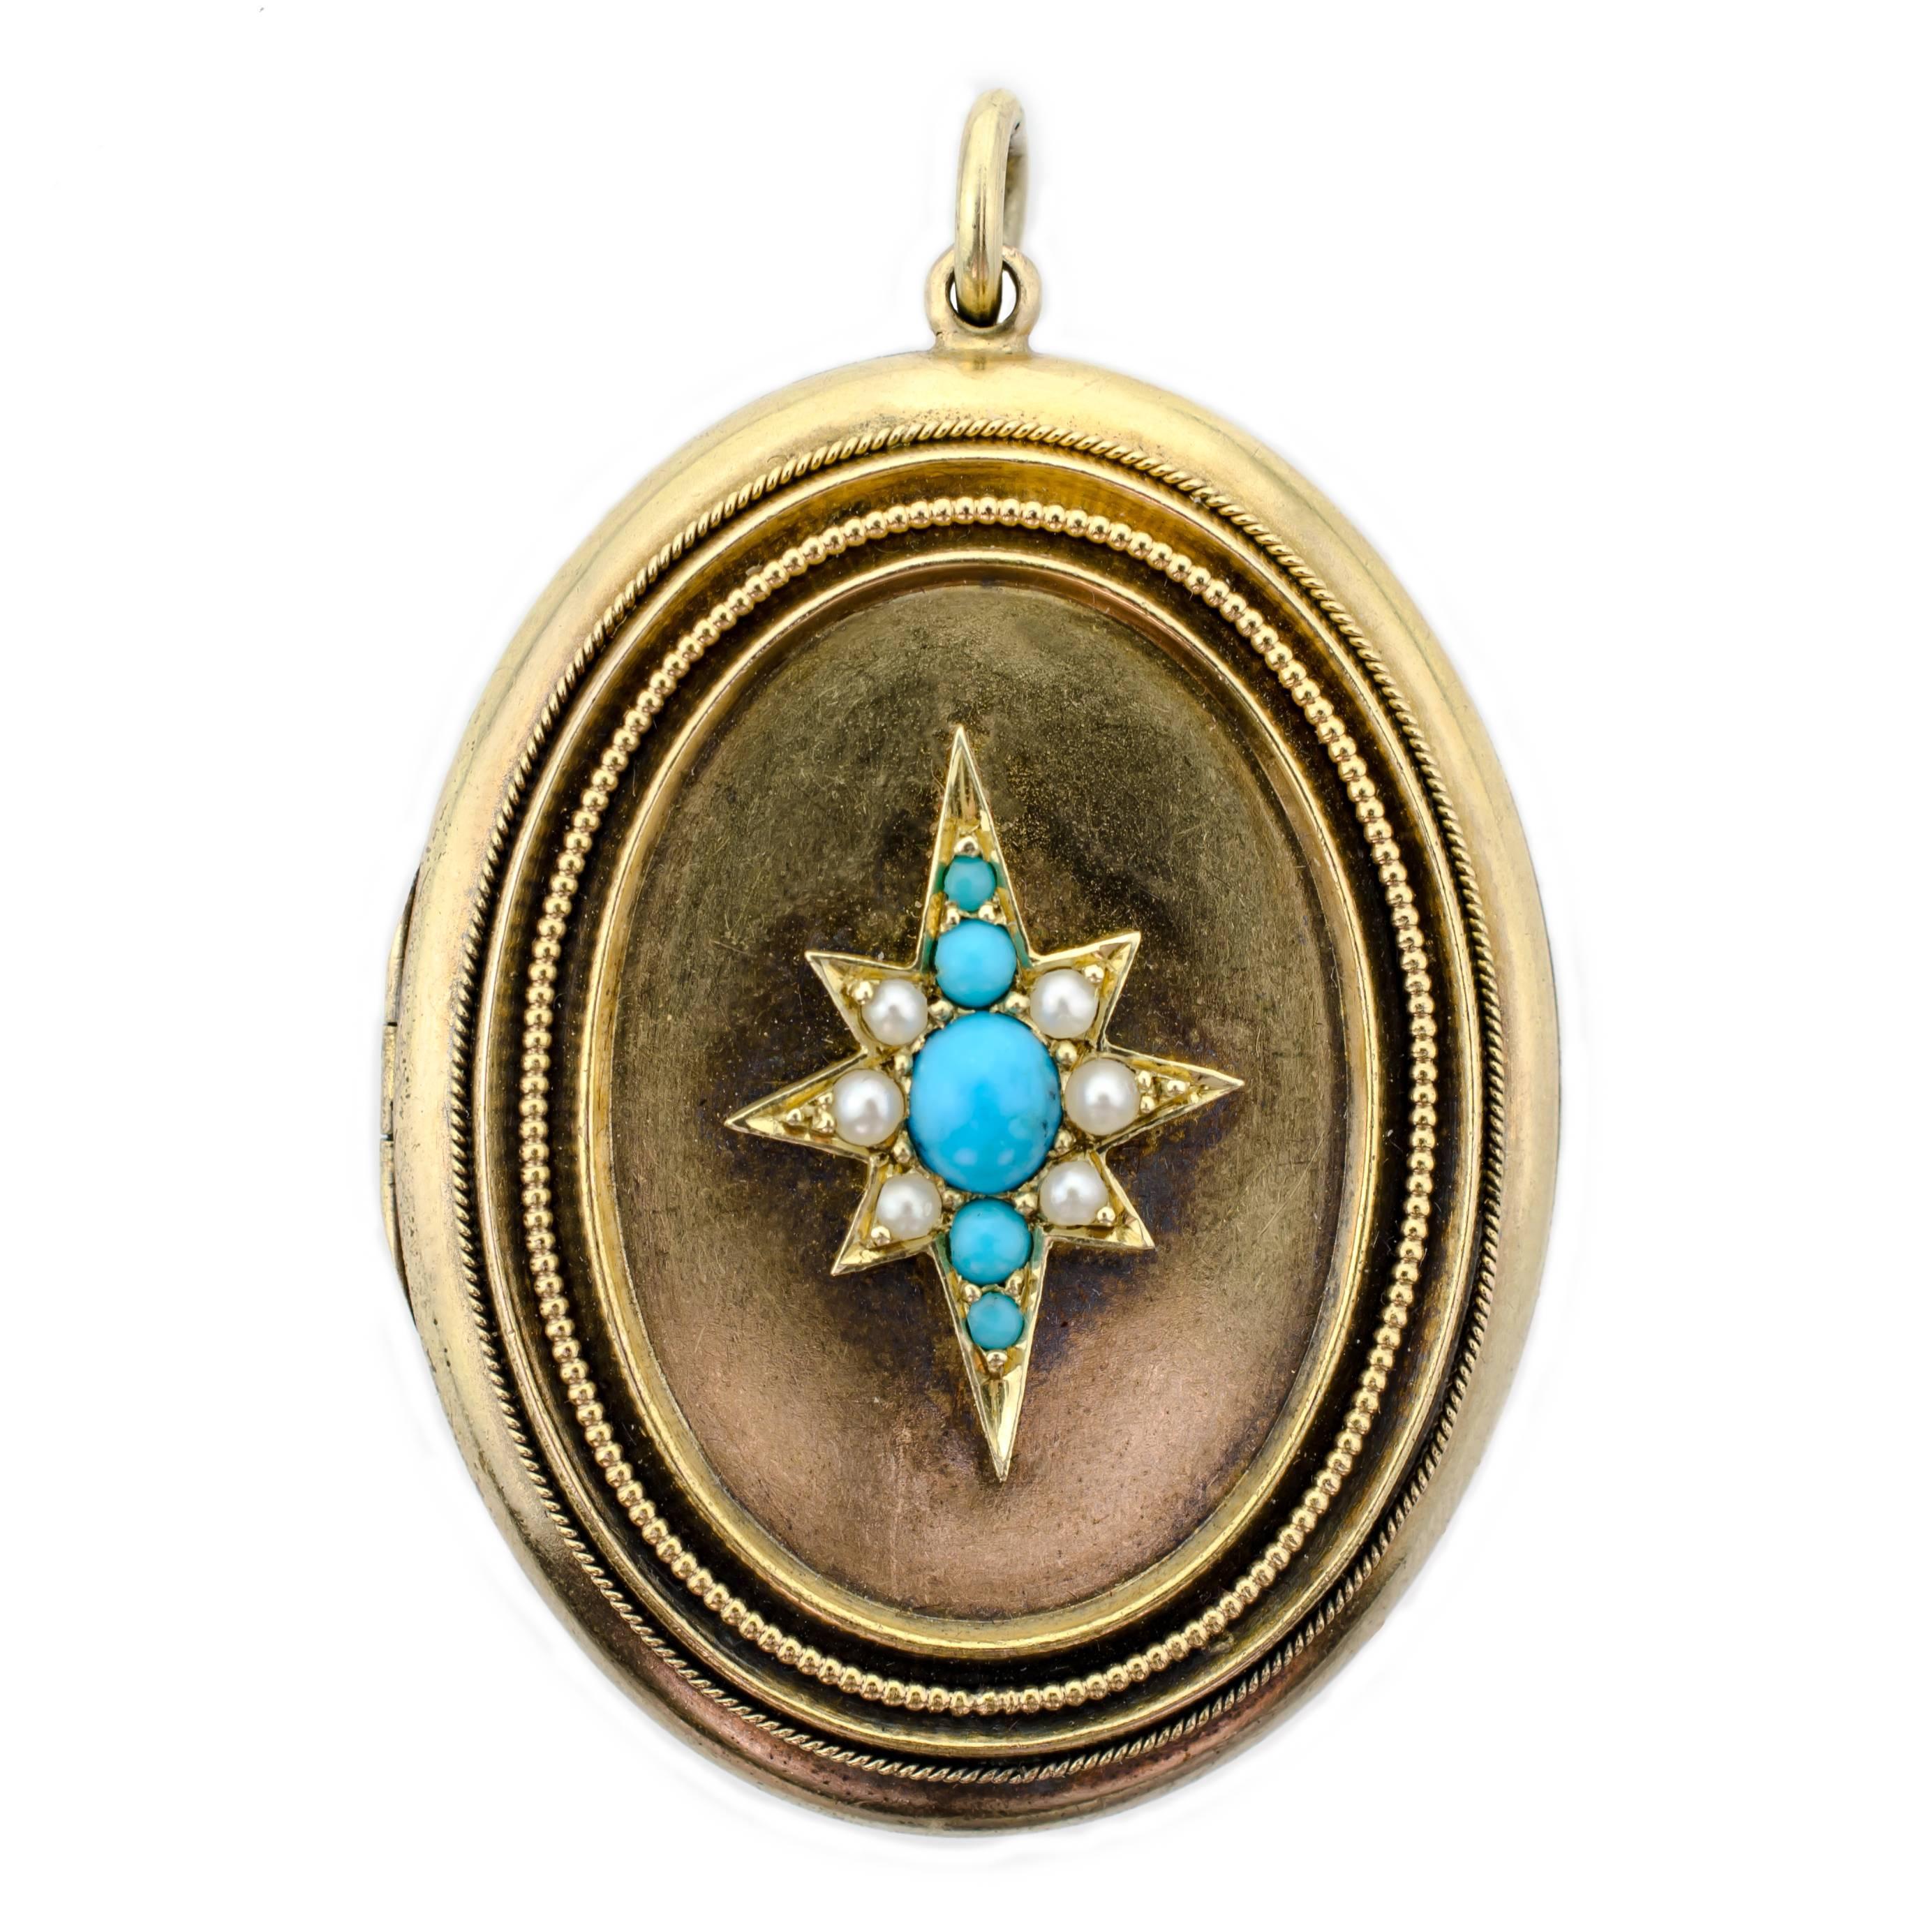 Lovely Victorian 14 Karat Yellow Gold Turquoise and Pearl Locket